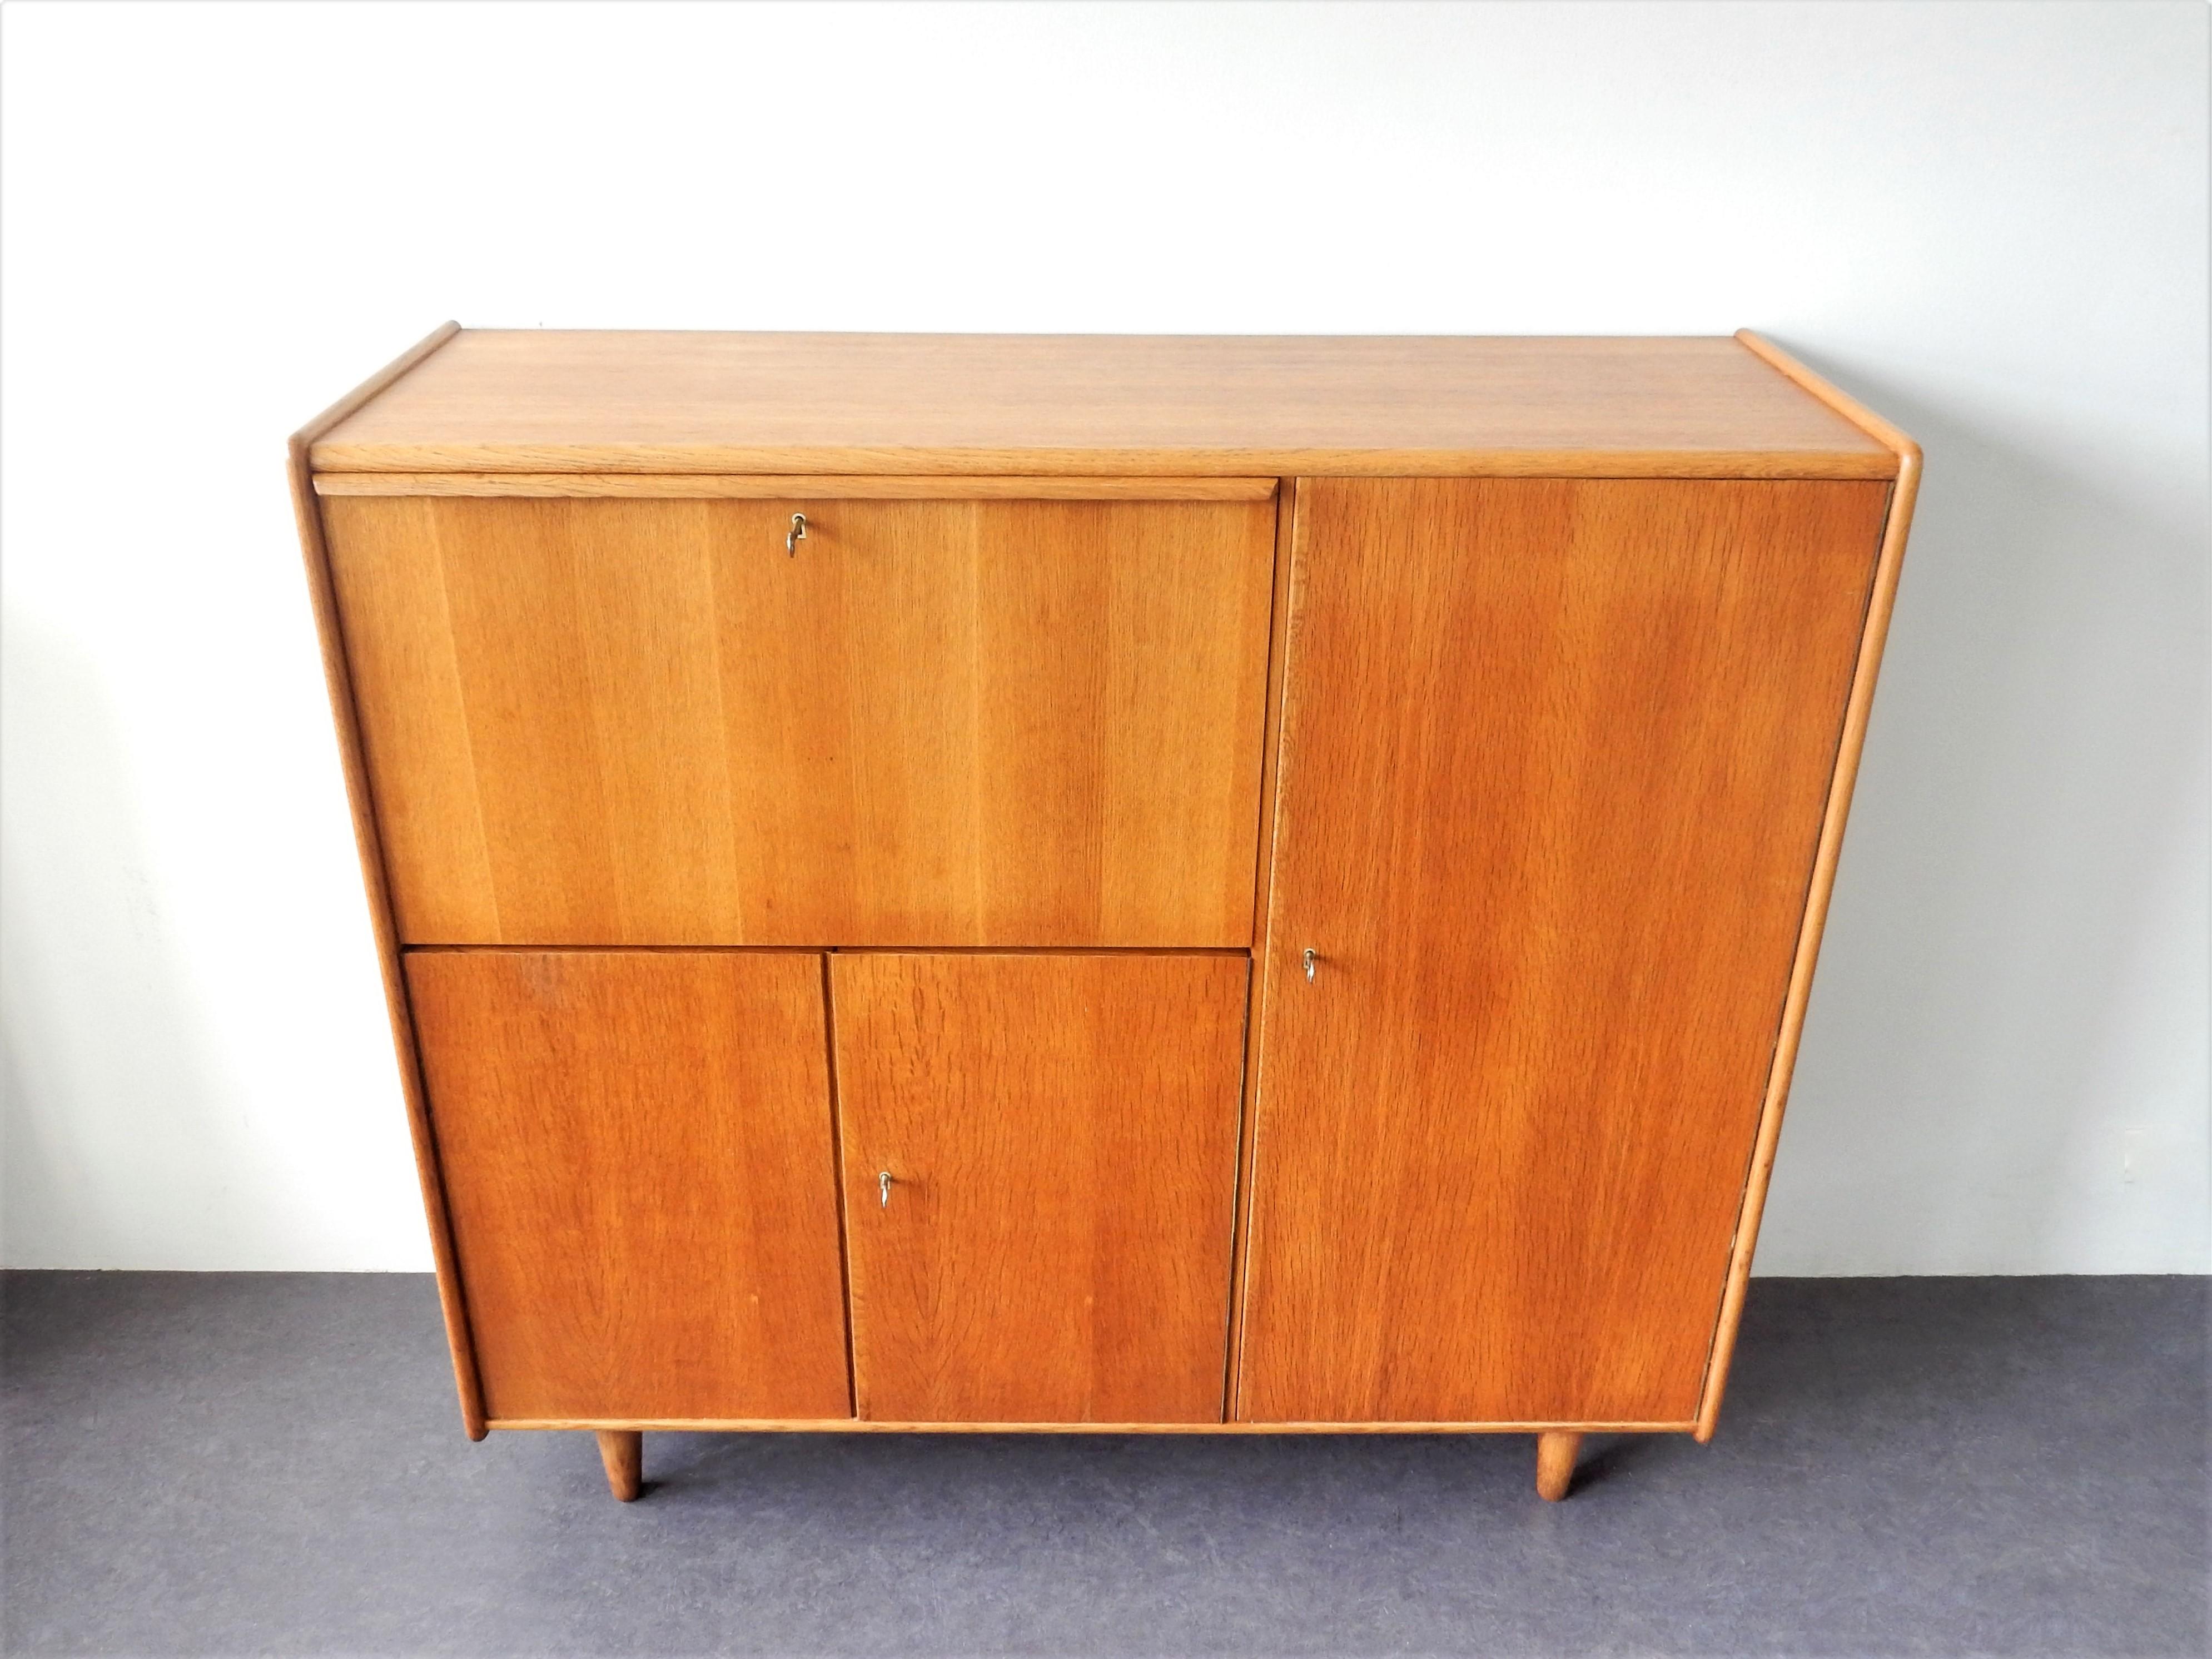 This stunning highboard, model CE09, was designed by Cees Braakman for Pastoe in about 1948. An early design, made of oak veneered board. It has 3 doors and a flap door with 3 keys, of which 2 are original and a third key is a replacement. There is